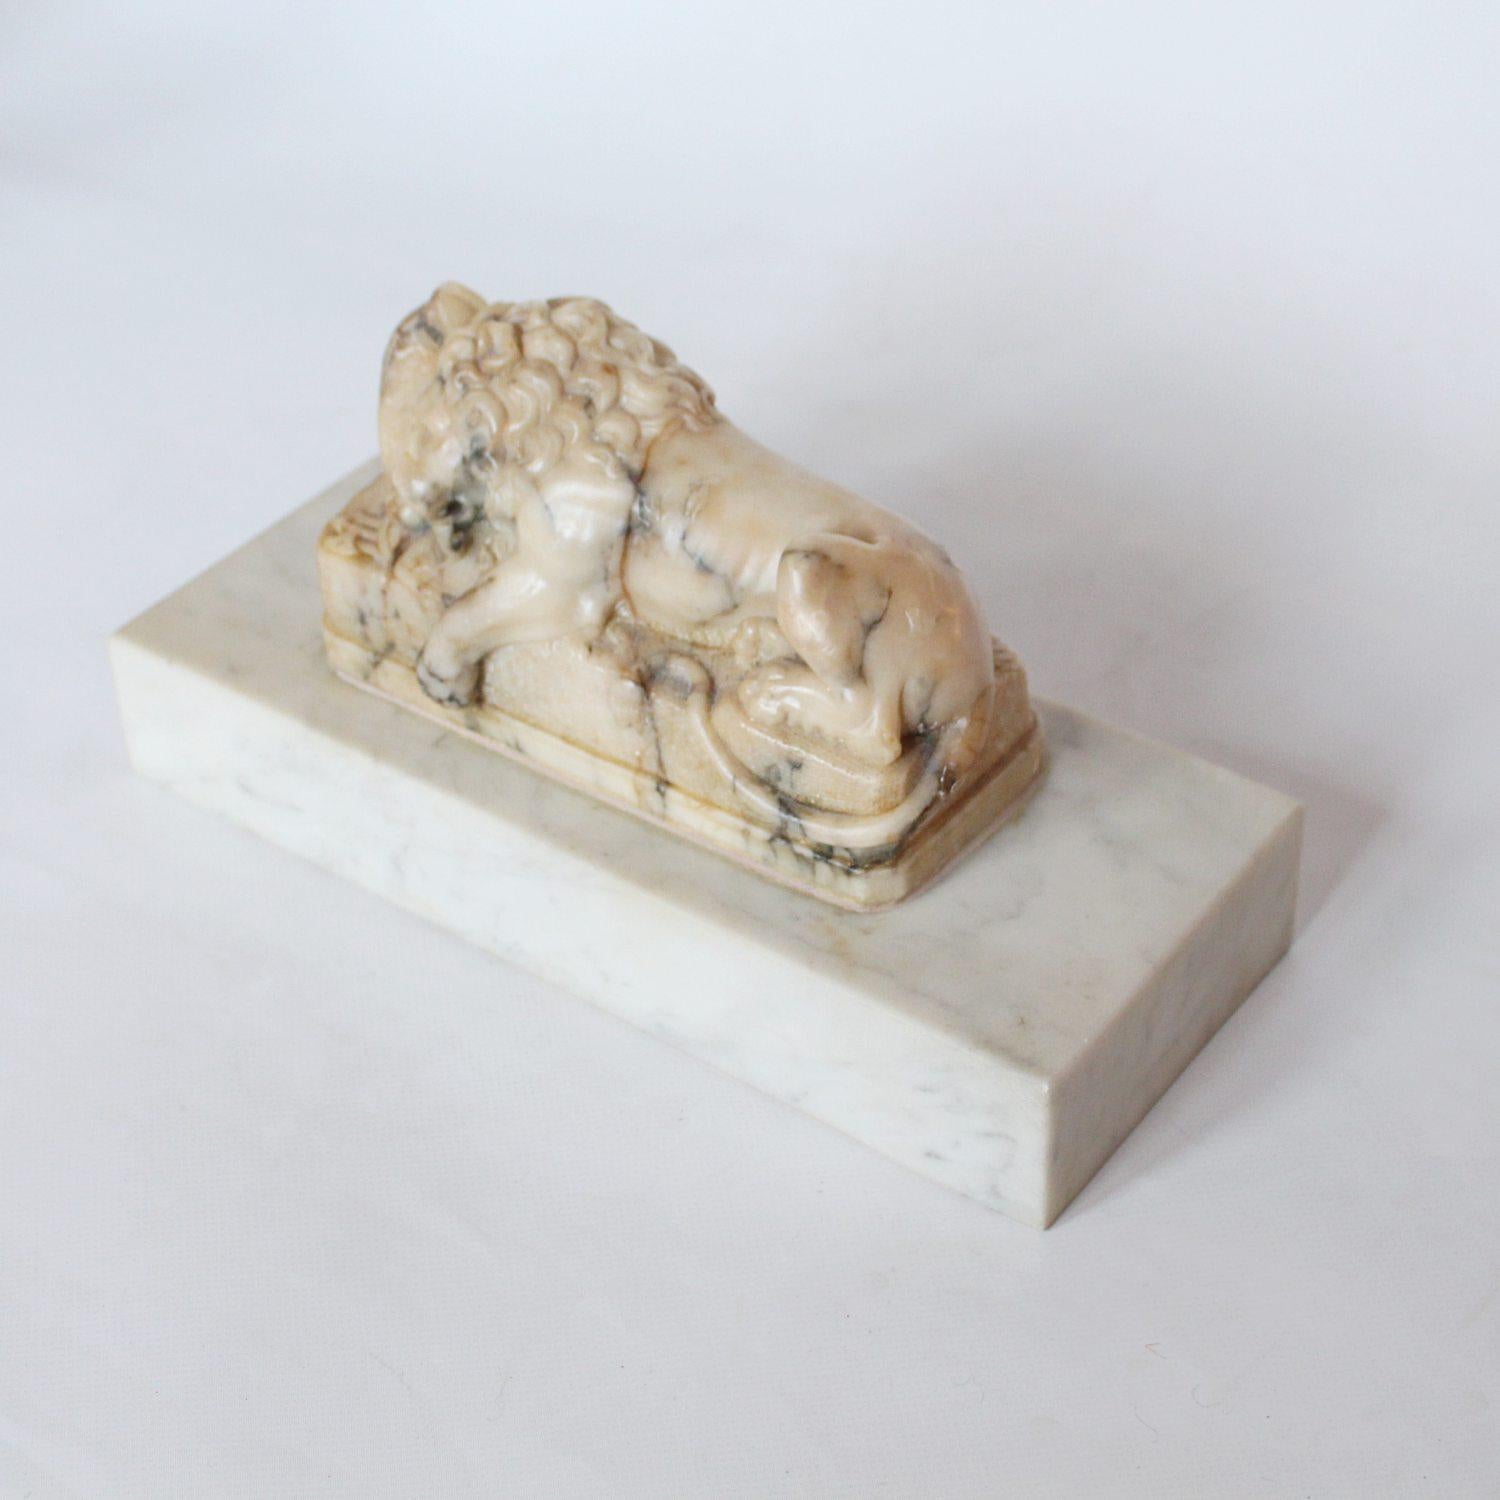 Neoclassical Revival 19th Century Carved Alabaster Lion